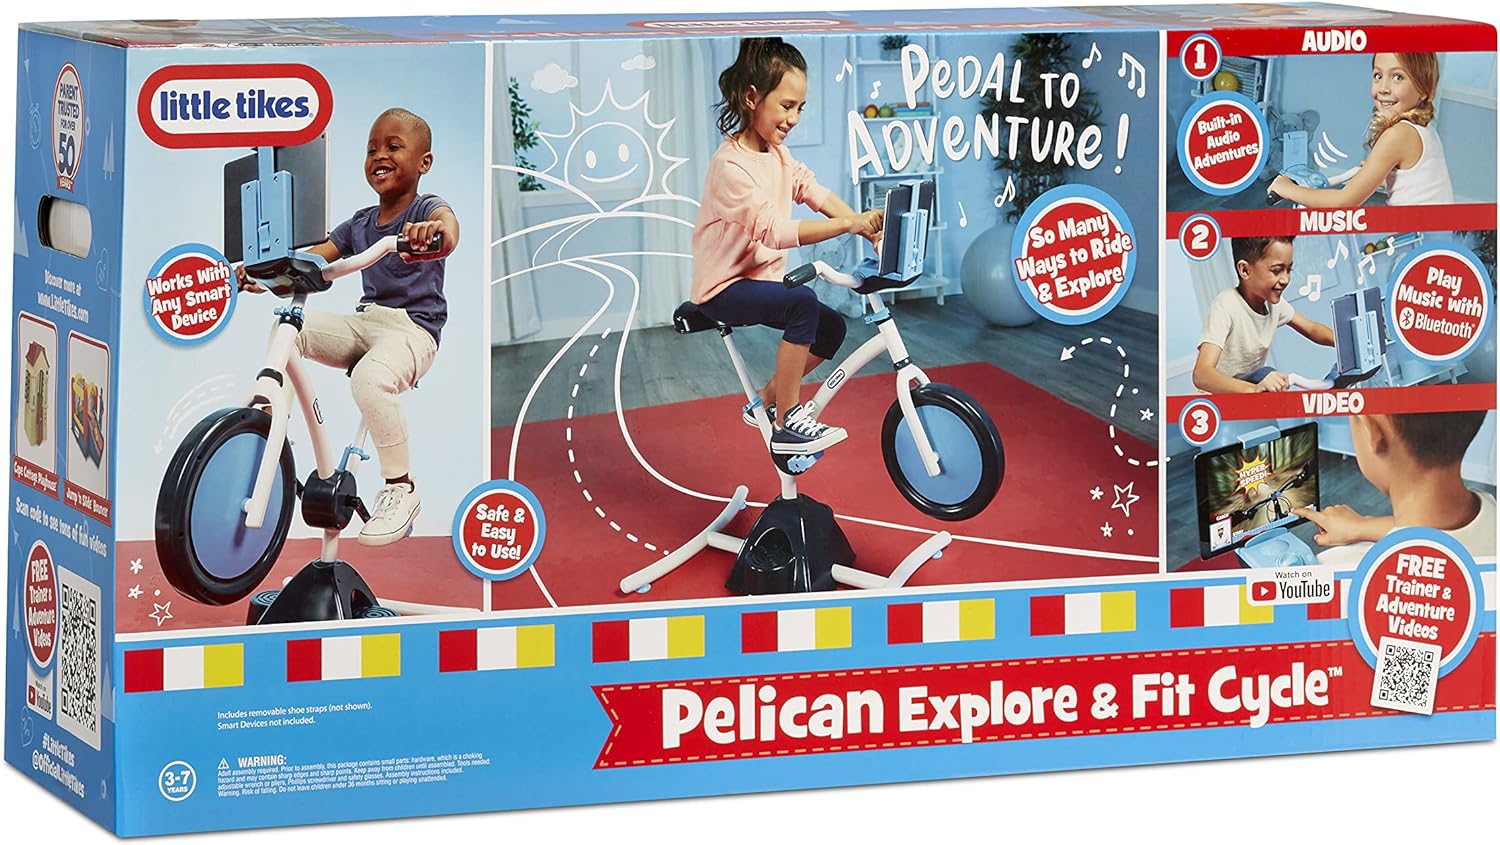 Little Tikes Pelican Explore & Fit Cycle Adjustable Play Fitness Exercise Equipment Stationary Bike with Videos and Built-in Bluetooth Speaker, For Kids Ages 3-7 Years, WHITE, BLUE